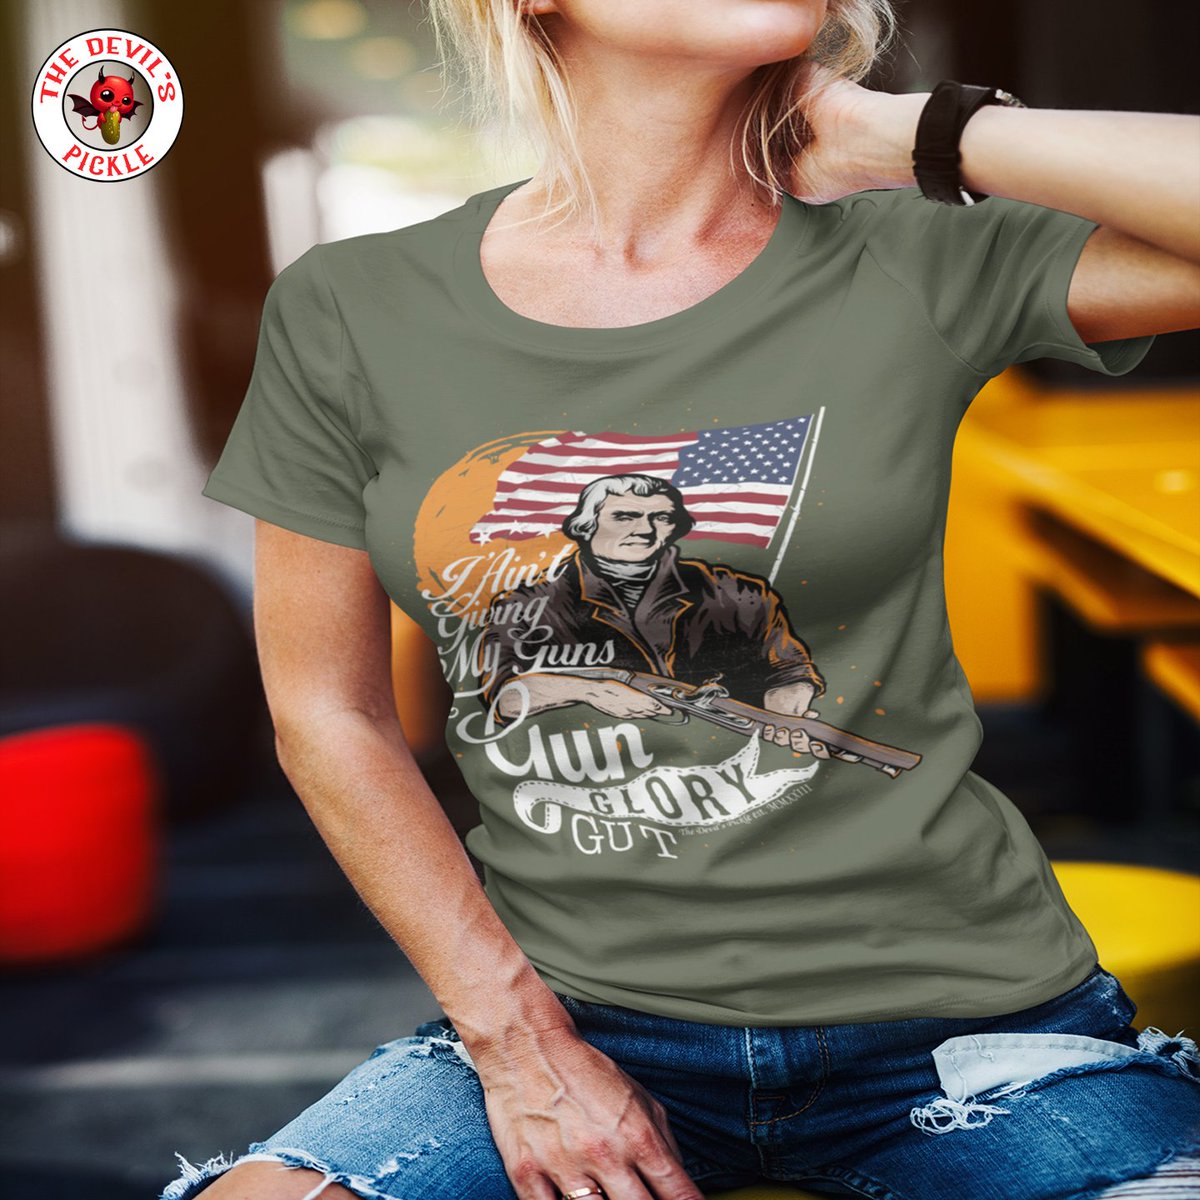 Locked and loaded with this fresh tee 🔒🔥 The Best Patriotic Tees, Hoodies, Sweatshirts and More only at The Devil's Pickle.

#USA #byob #ProudAmerican #Freedom #hellyeahamerica #UnitedStates #american #tshirt #2ndamendment #patriotichoodies #proudtobeanamerican